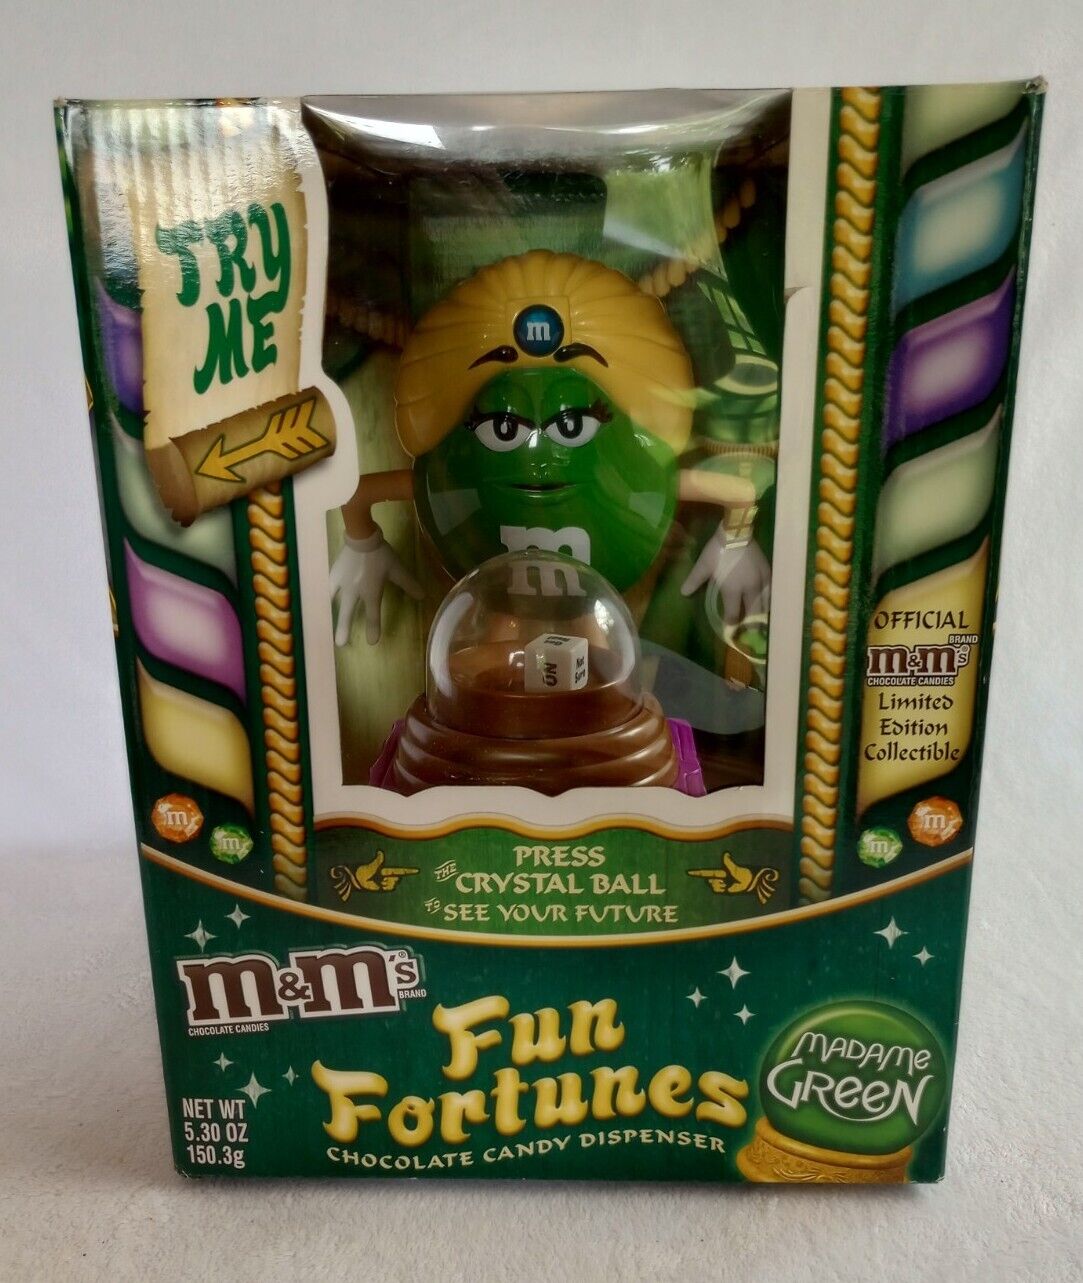 M&M Mars Collectibles Chocolate Candy Dispenser Green Madame Fun Fortunes